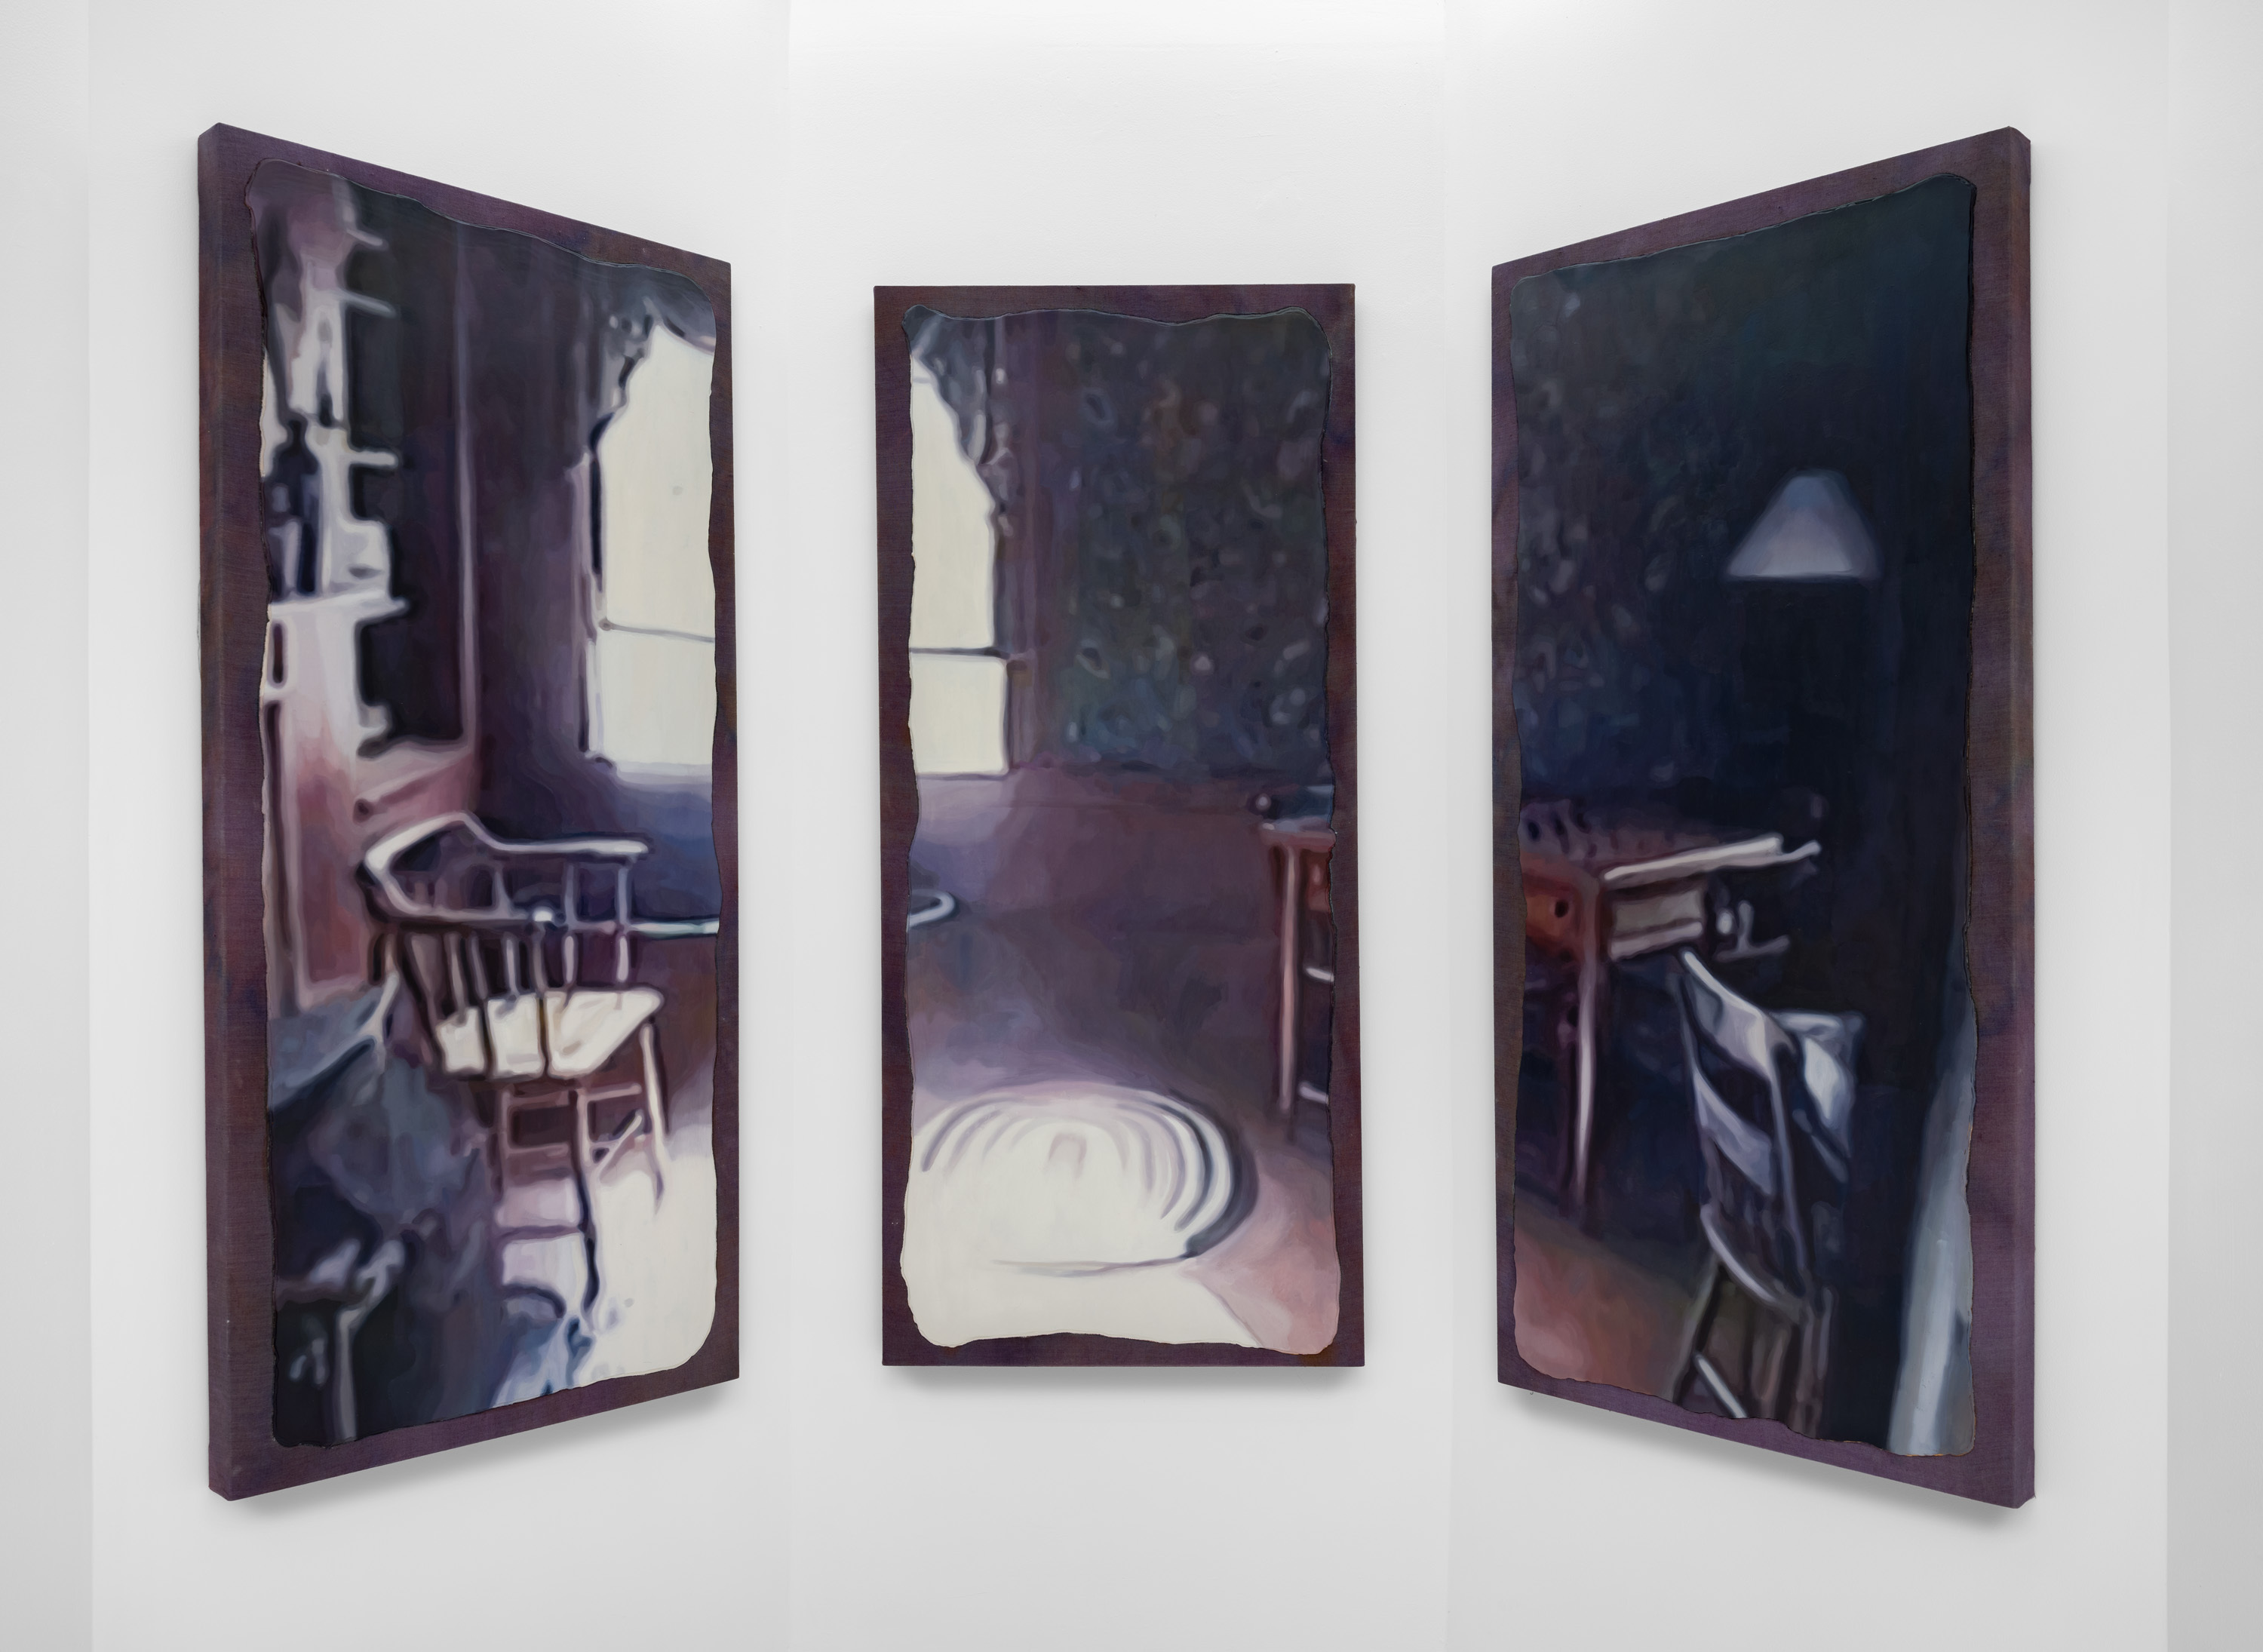 Eternally off course, 2023, Oil on linen stretched panel, 60 x 26.75 inches (3 parts)